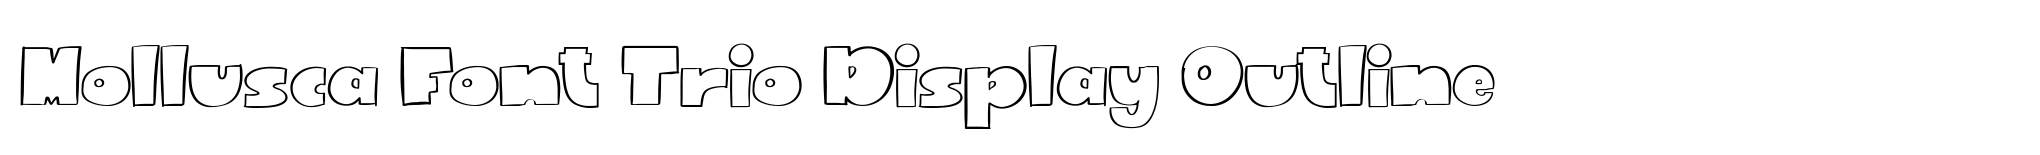 Mollusca Font Trio Display Outline image